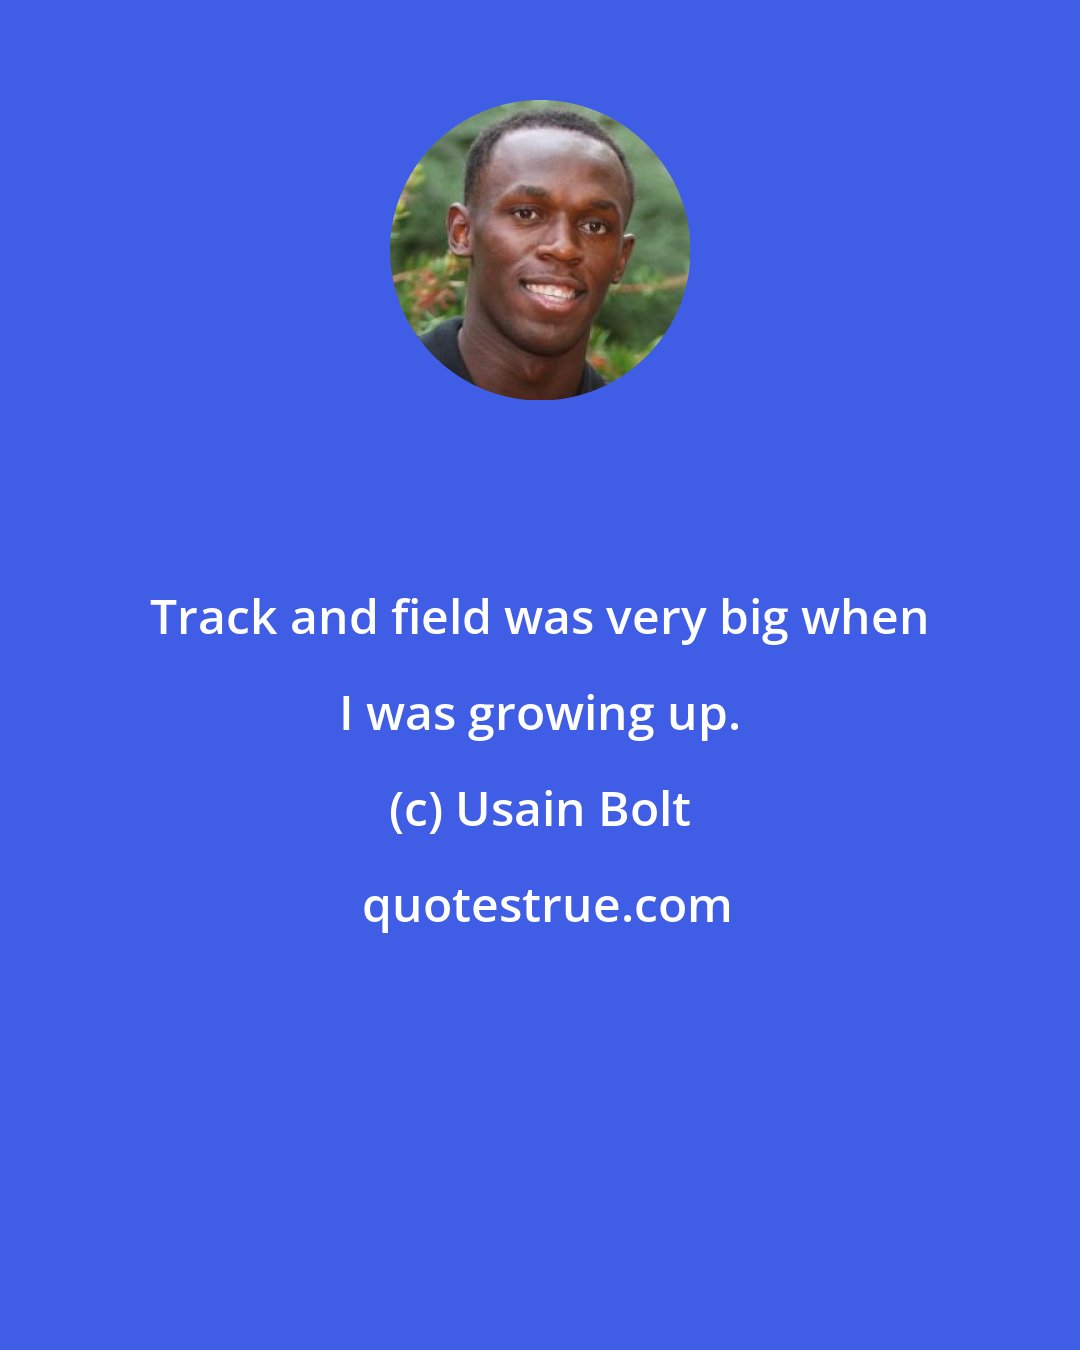 Usain Bolt: Track and field was very big when I was growing up.